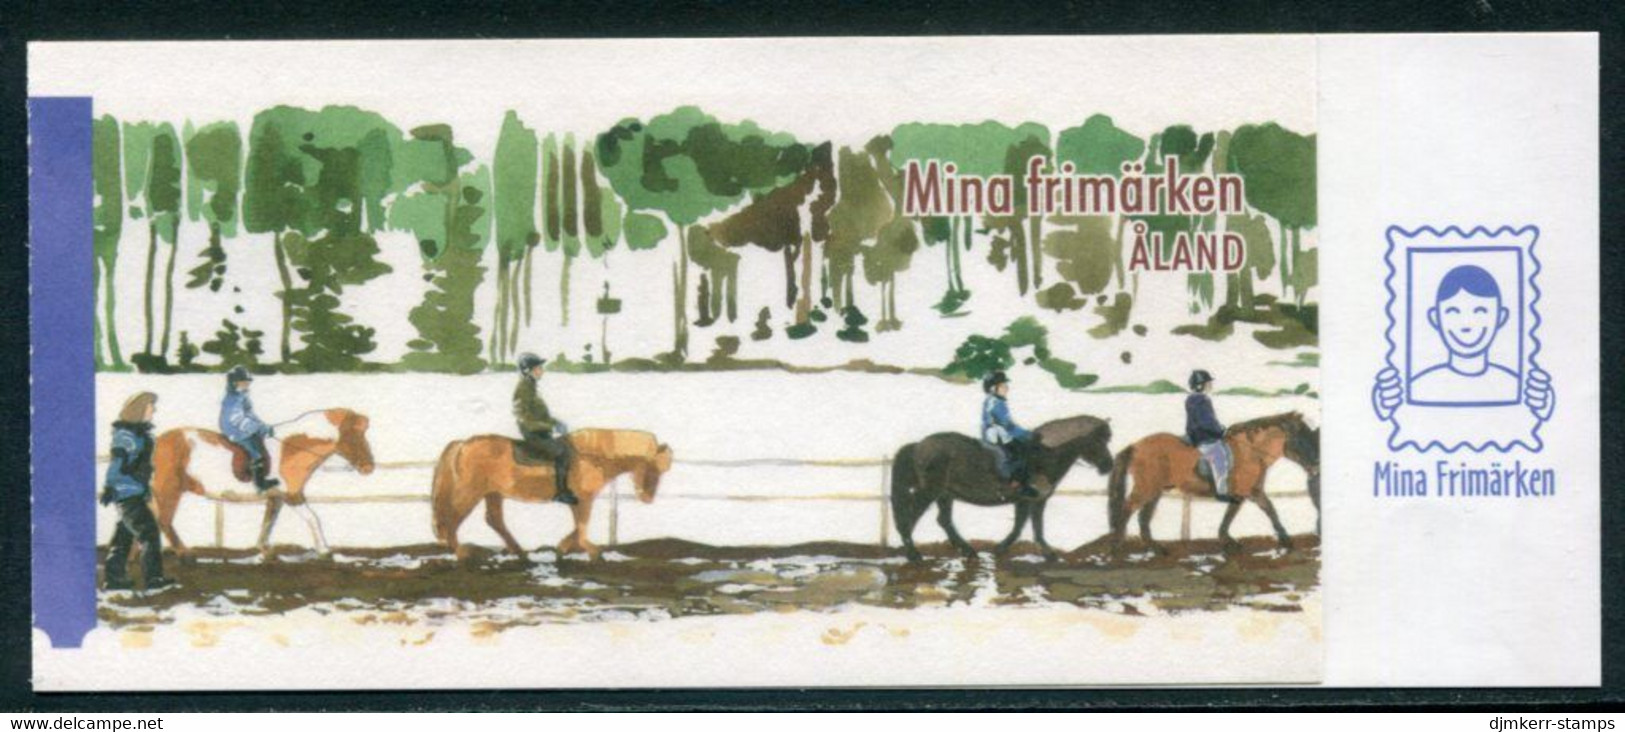 ALAND ISLANDS 2008 Personalised Stamp: Rider Booklet MNH / **.  Michel 302,MH - Ålandinseln